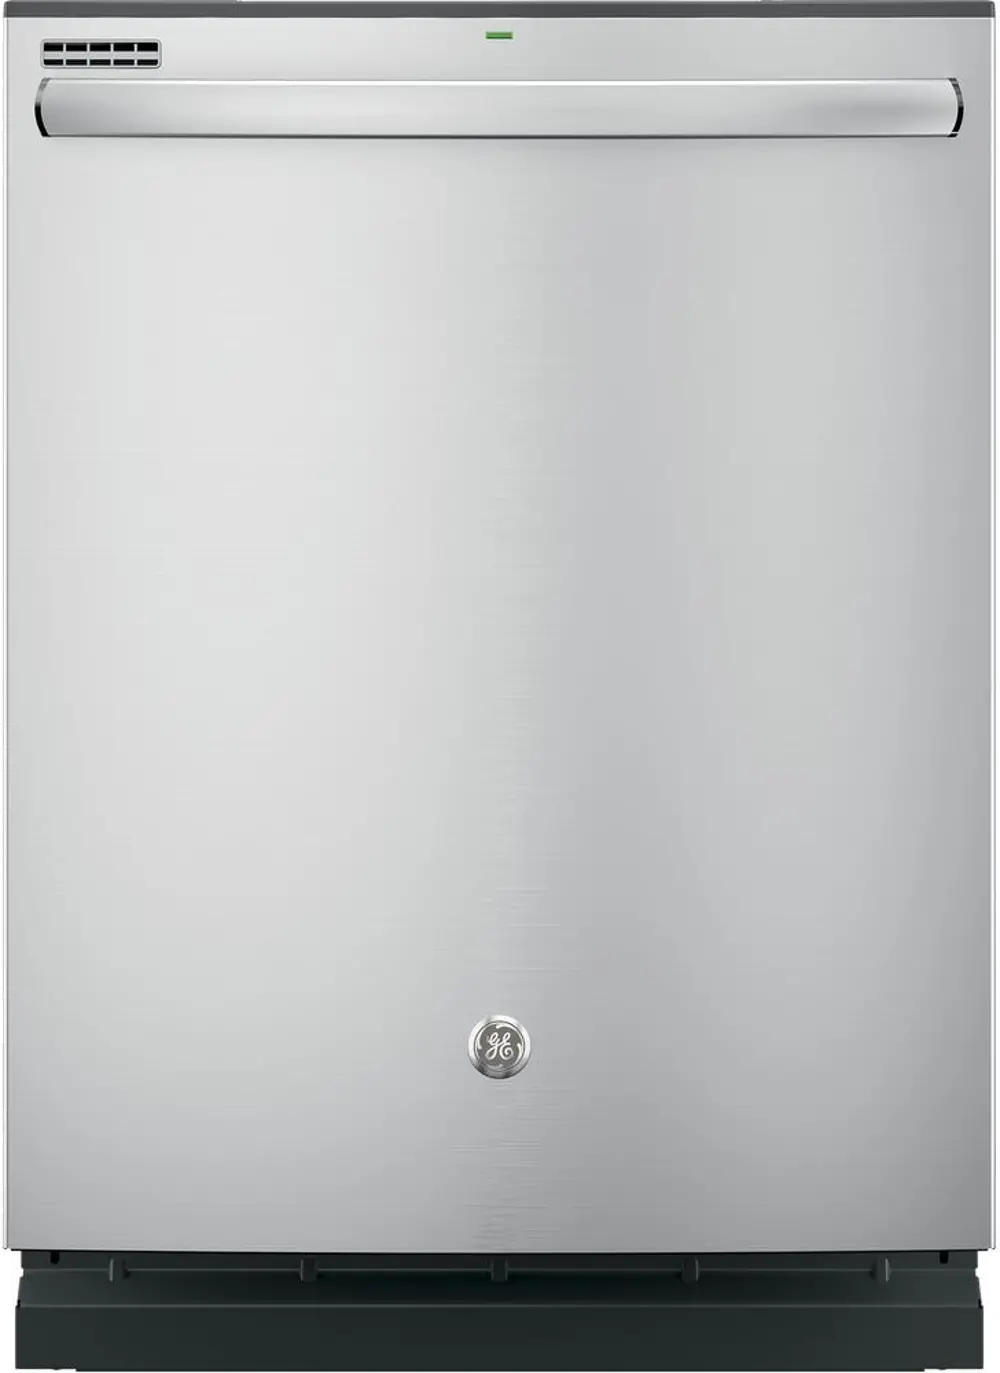 GDT545PSJSS GE SteamWash Dishwasher with Hidden Controls - Stainless Steel-1